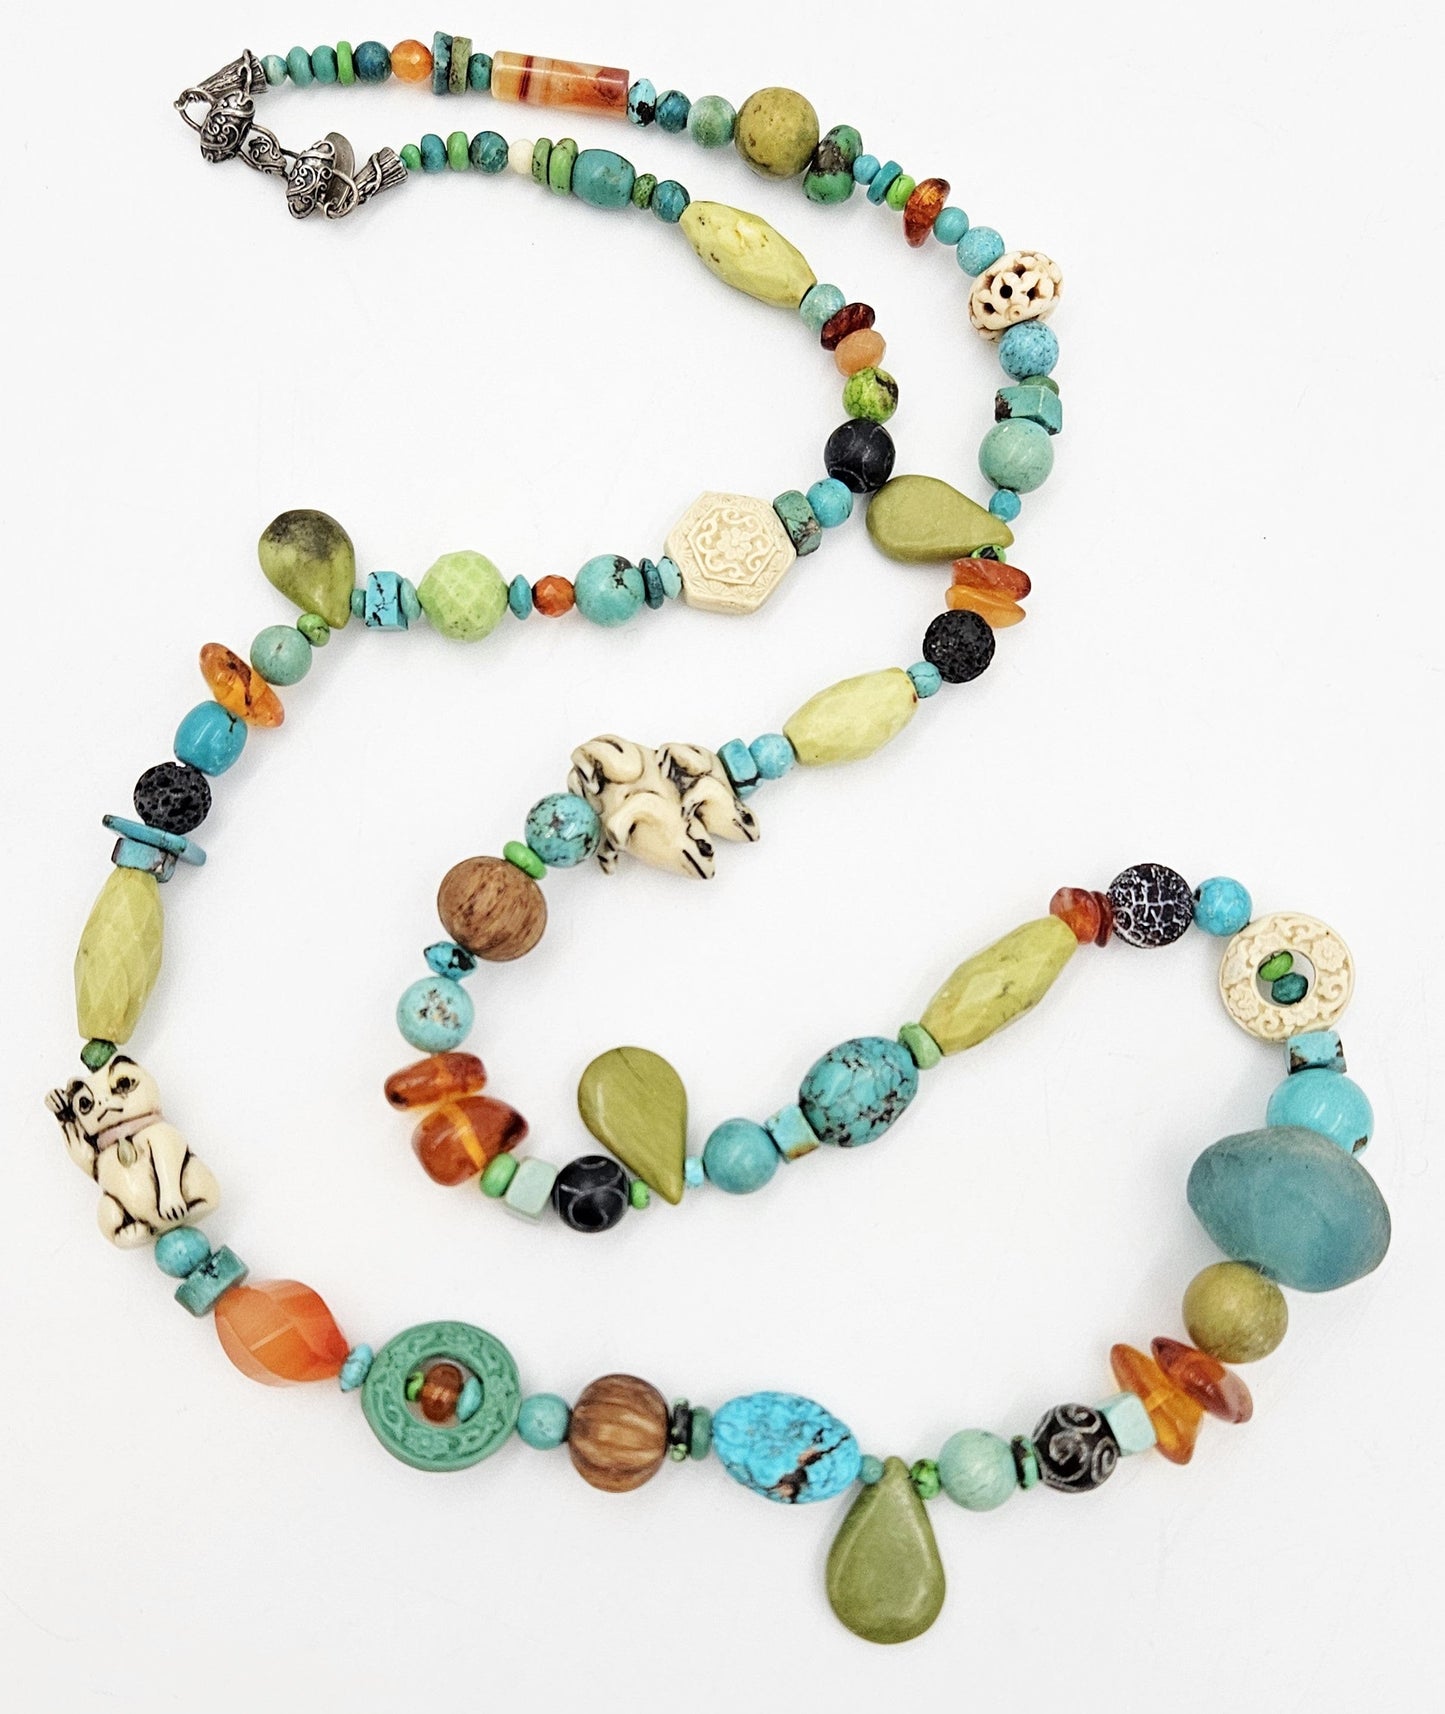 Echo of the Dreamer Jewelry Designer Echo of the Dreamer Sterling & Stones Runway Necklace